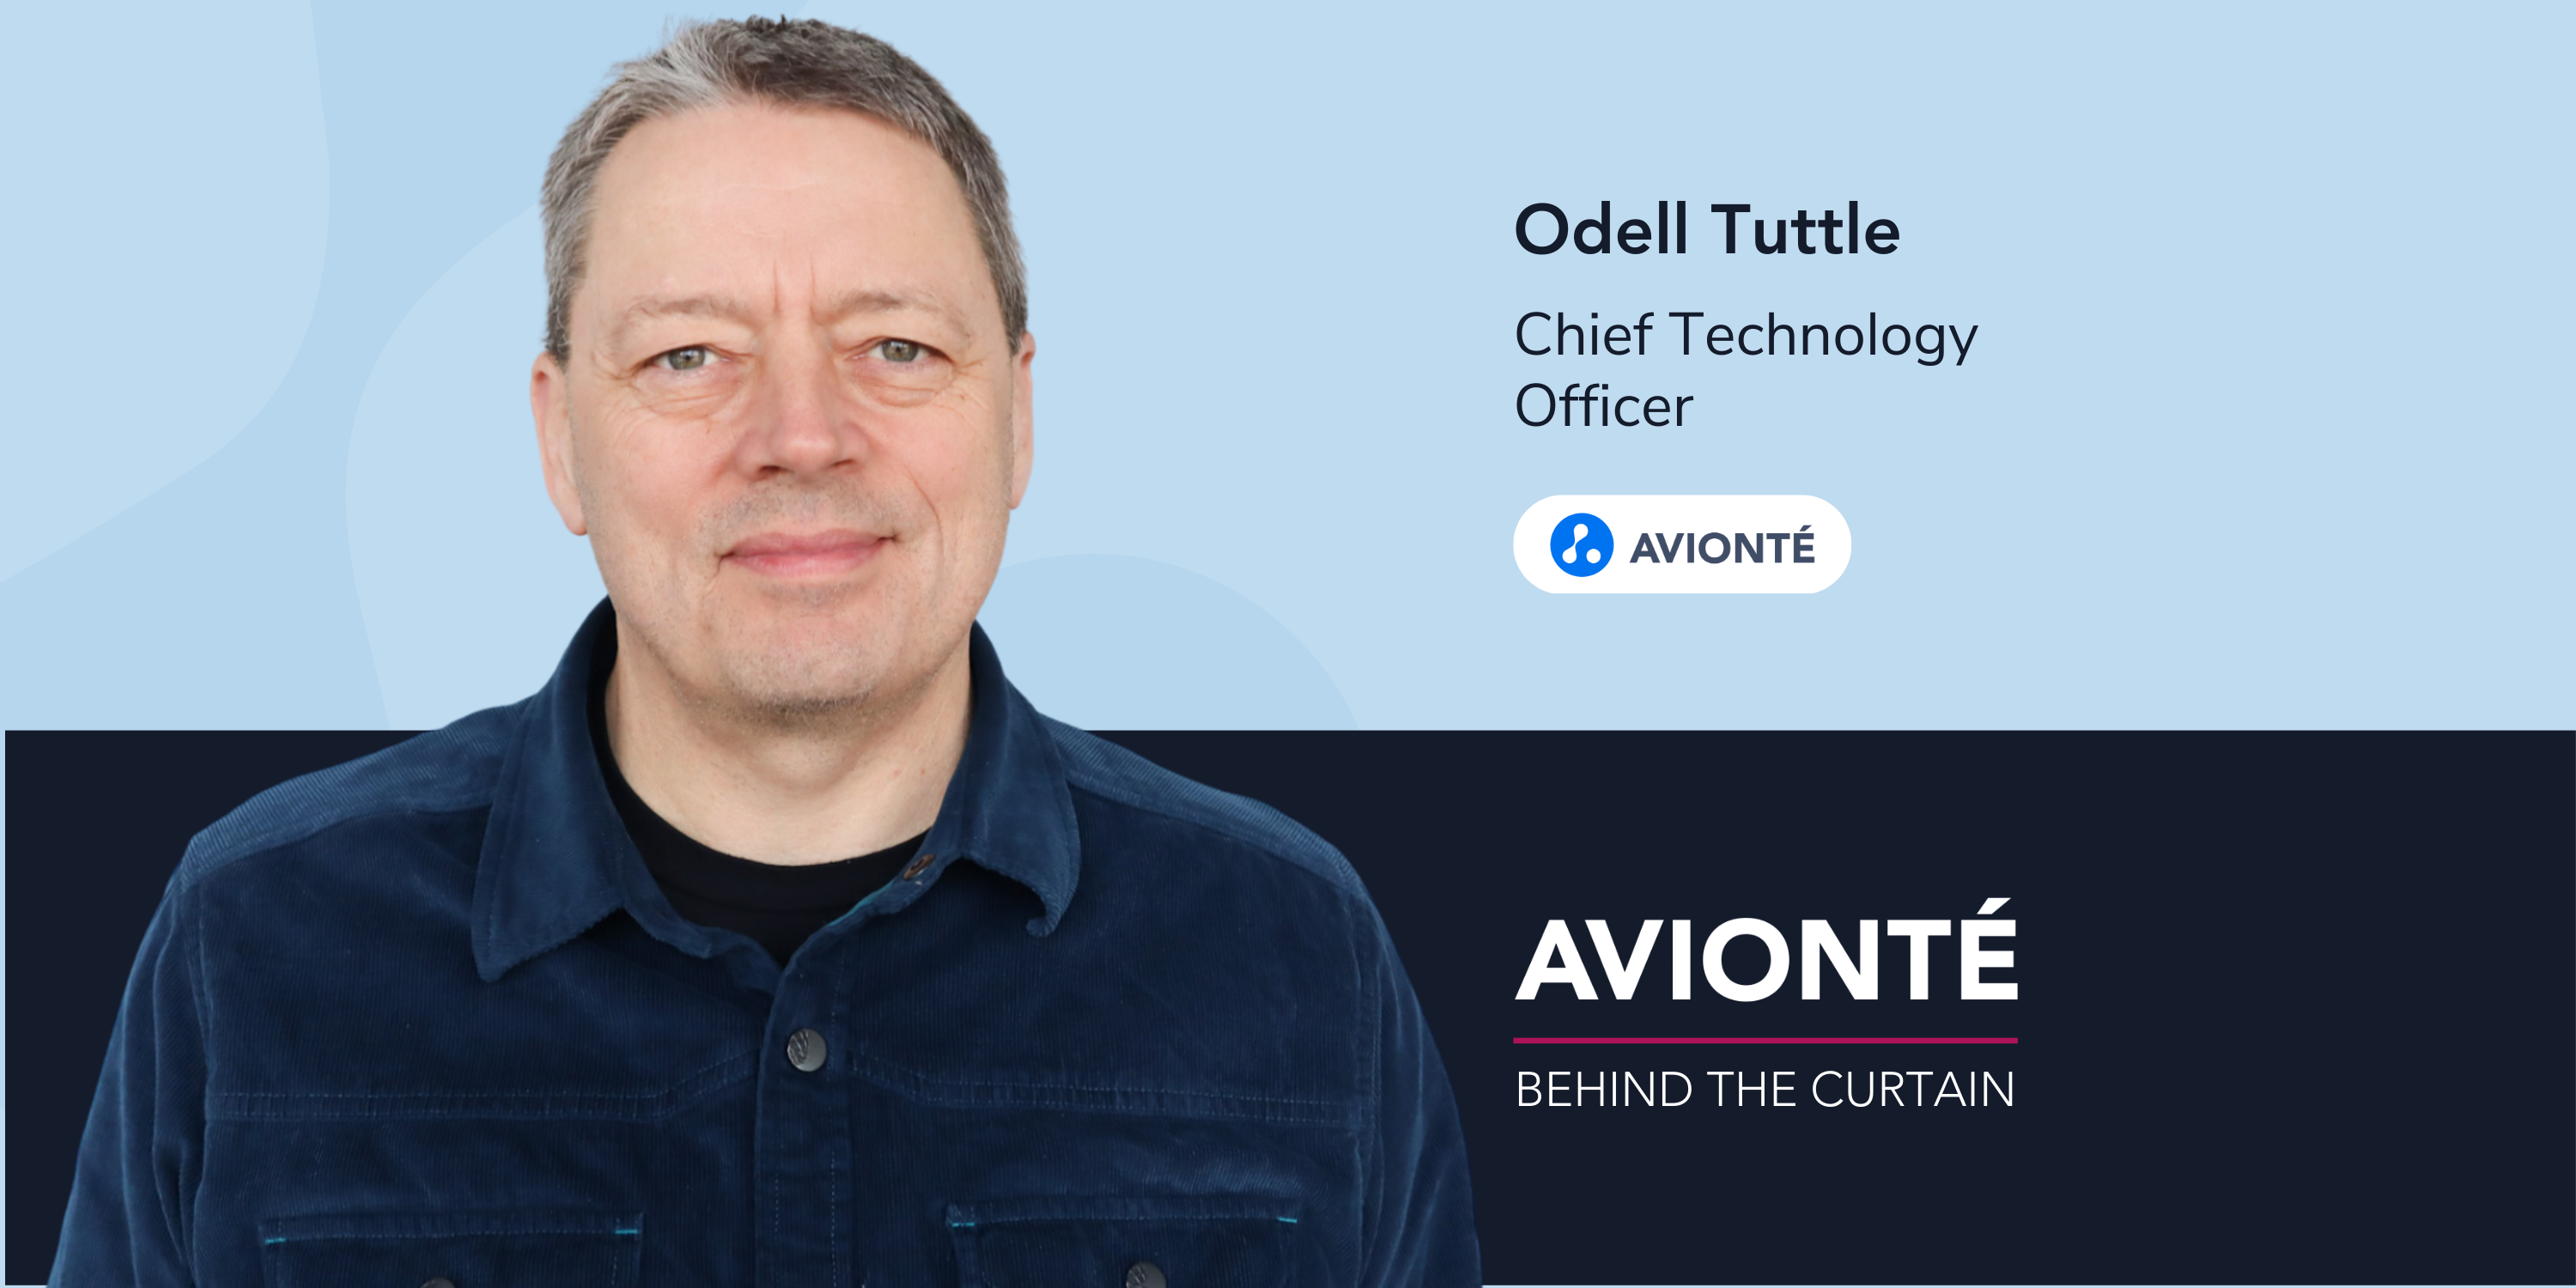 Odell Tuttle, Avionté Chief Technology Officer, Discusses Tech Strategy for Staffing & Recruiting